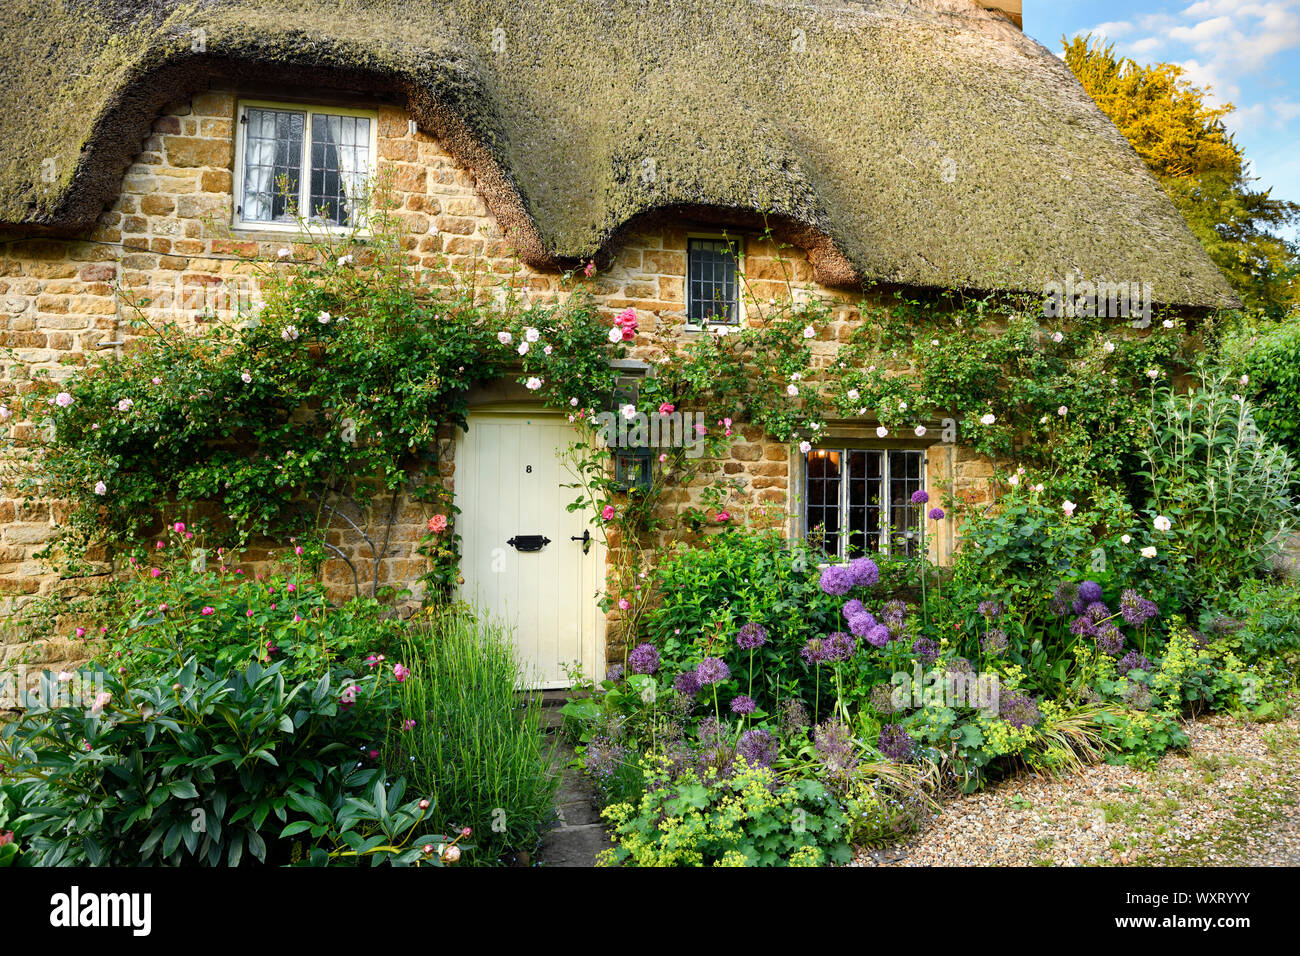 Historic thatched roof cottage in Great Tew village with garden flowers and climbing rose on yellow cotswold stone Oxfordshire England Stock Photo